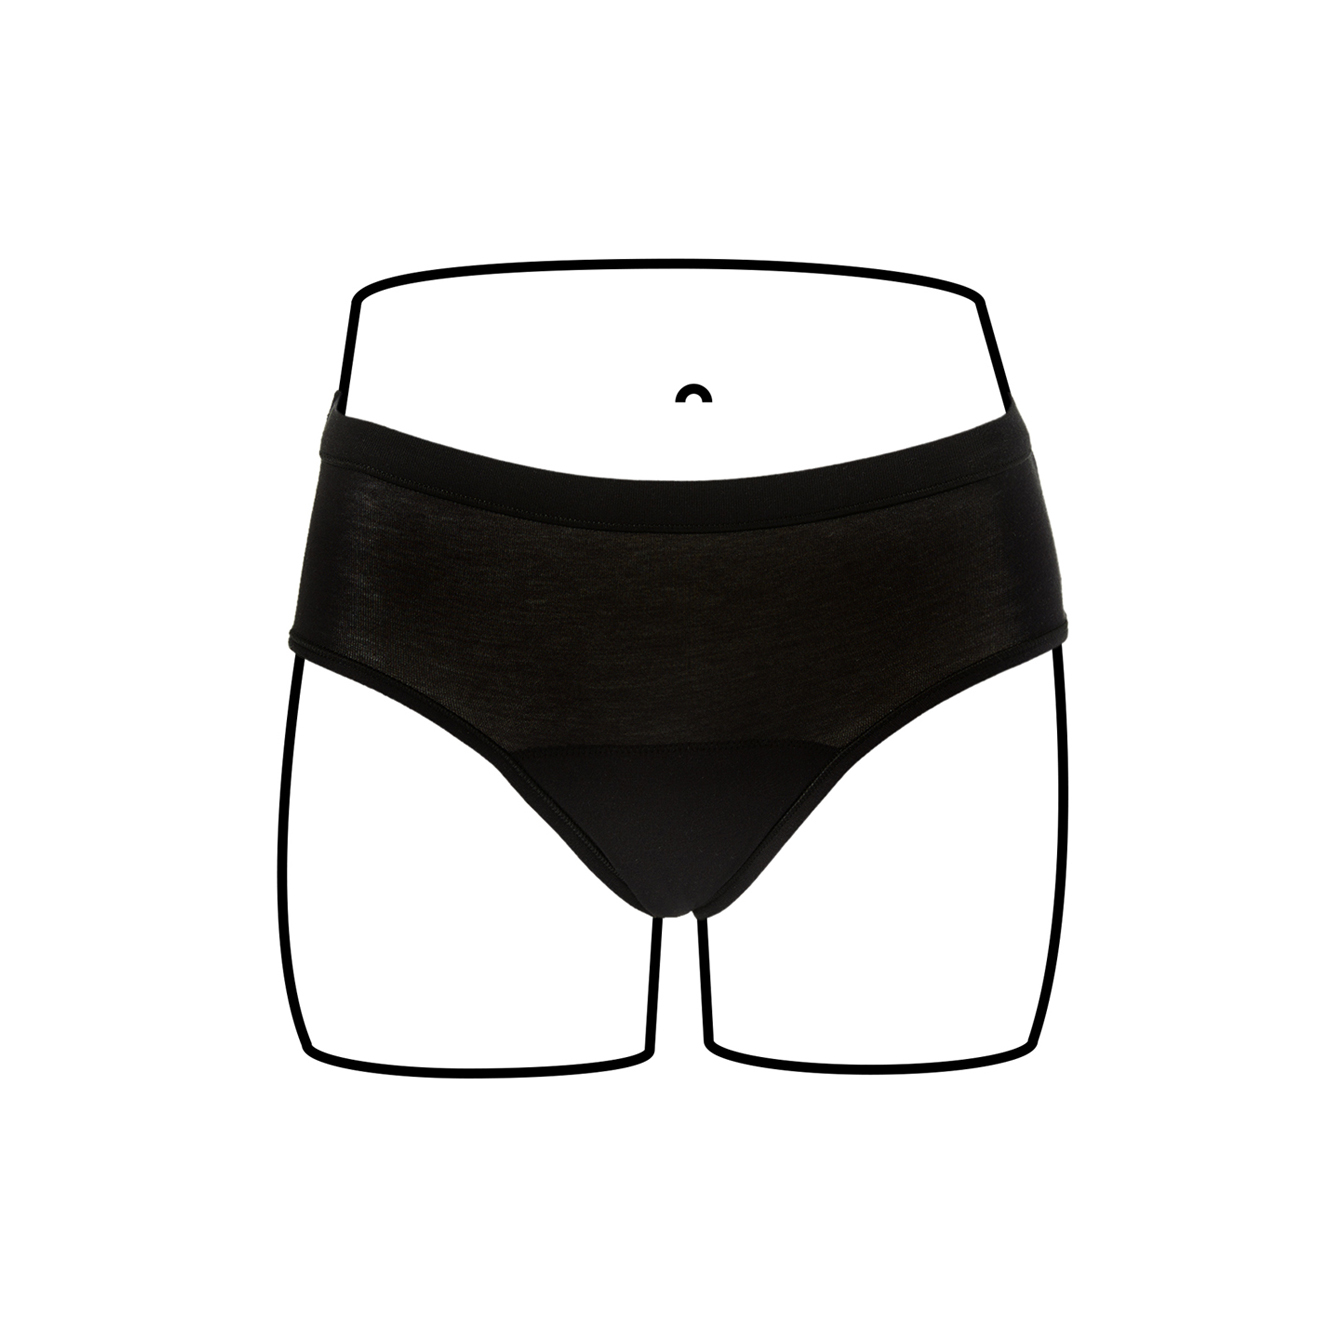 Period Panties - Thinx (BTWN), Shorty, Tidal Wave, Size 9/10 –